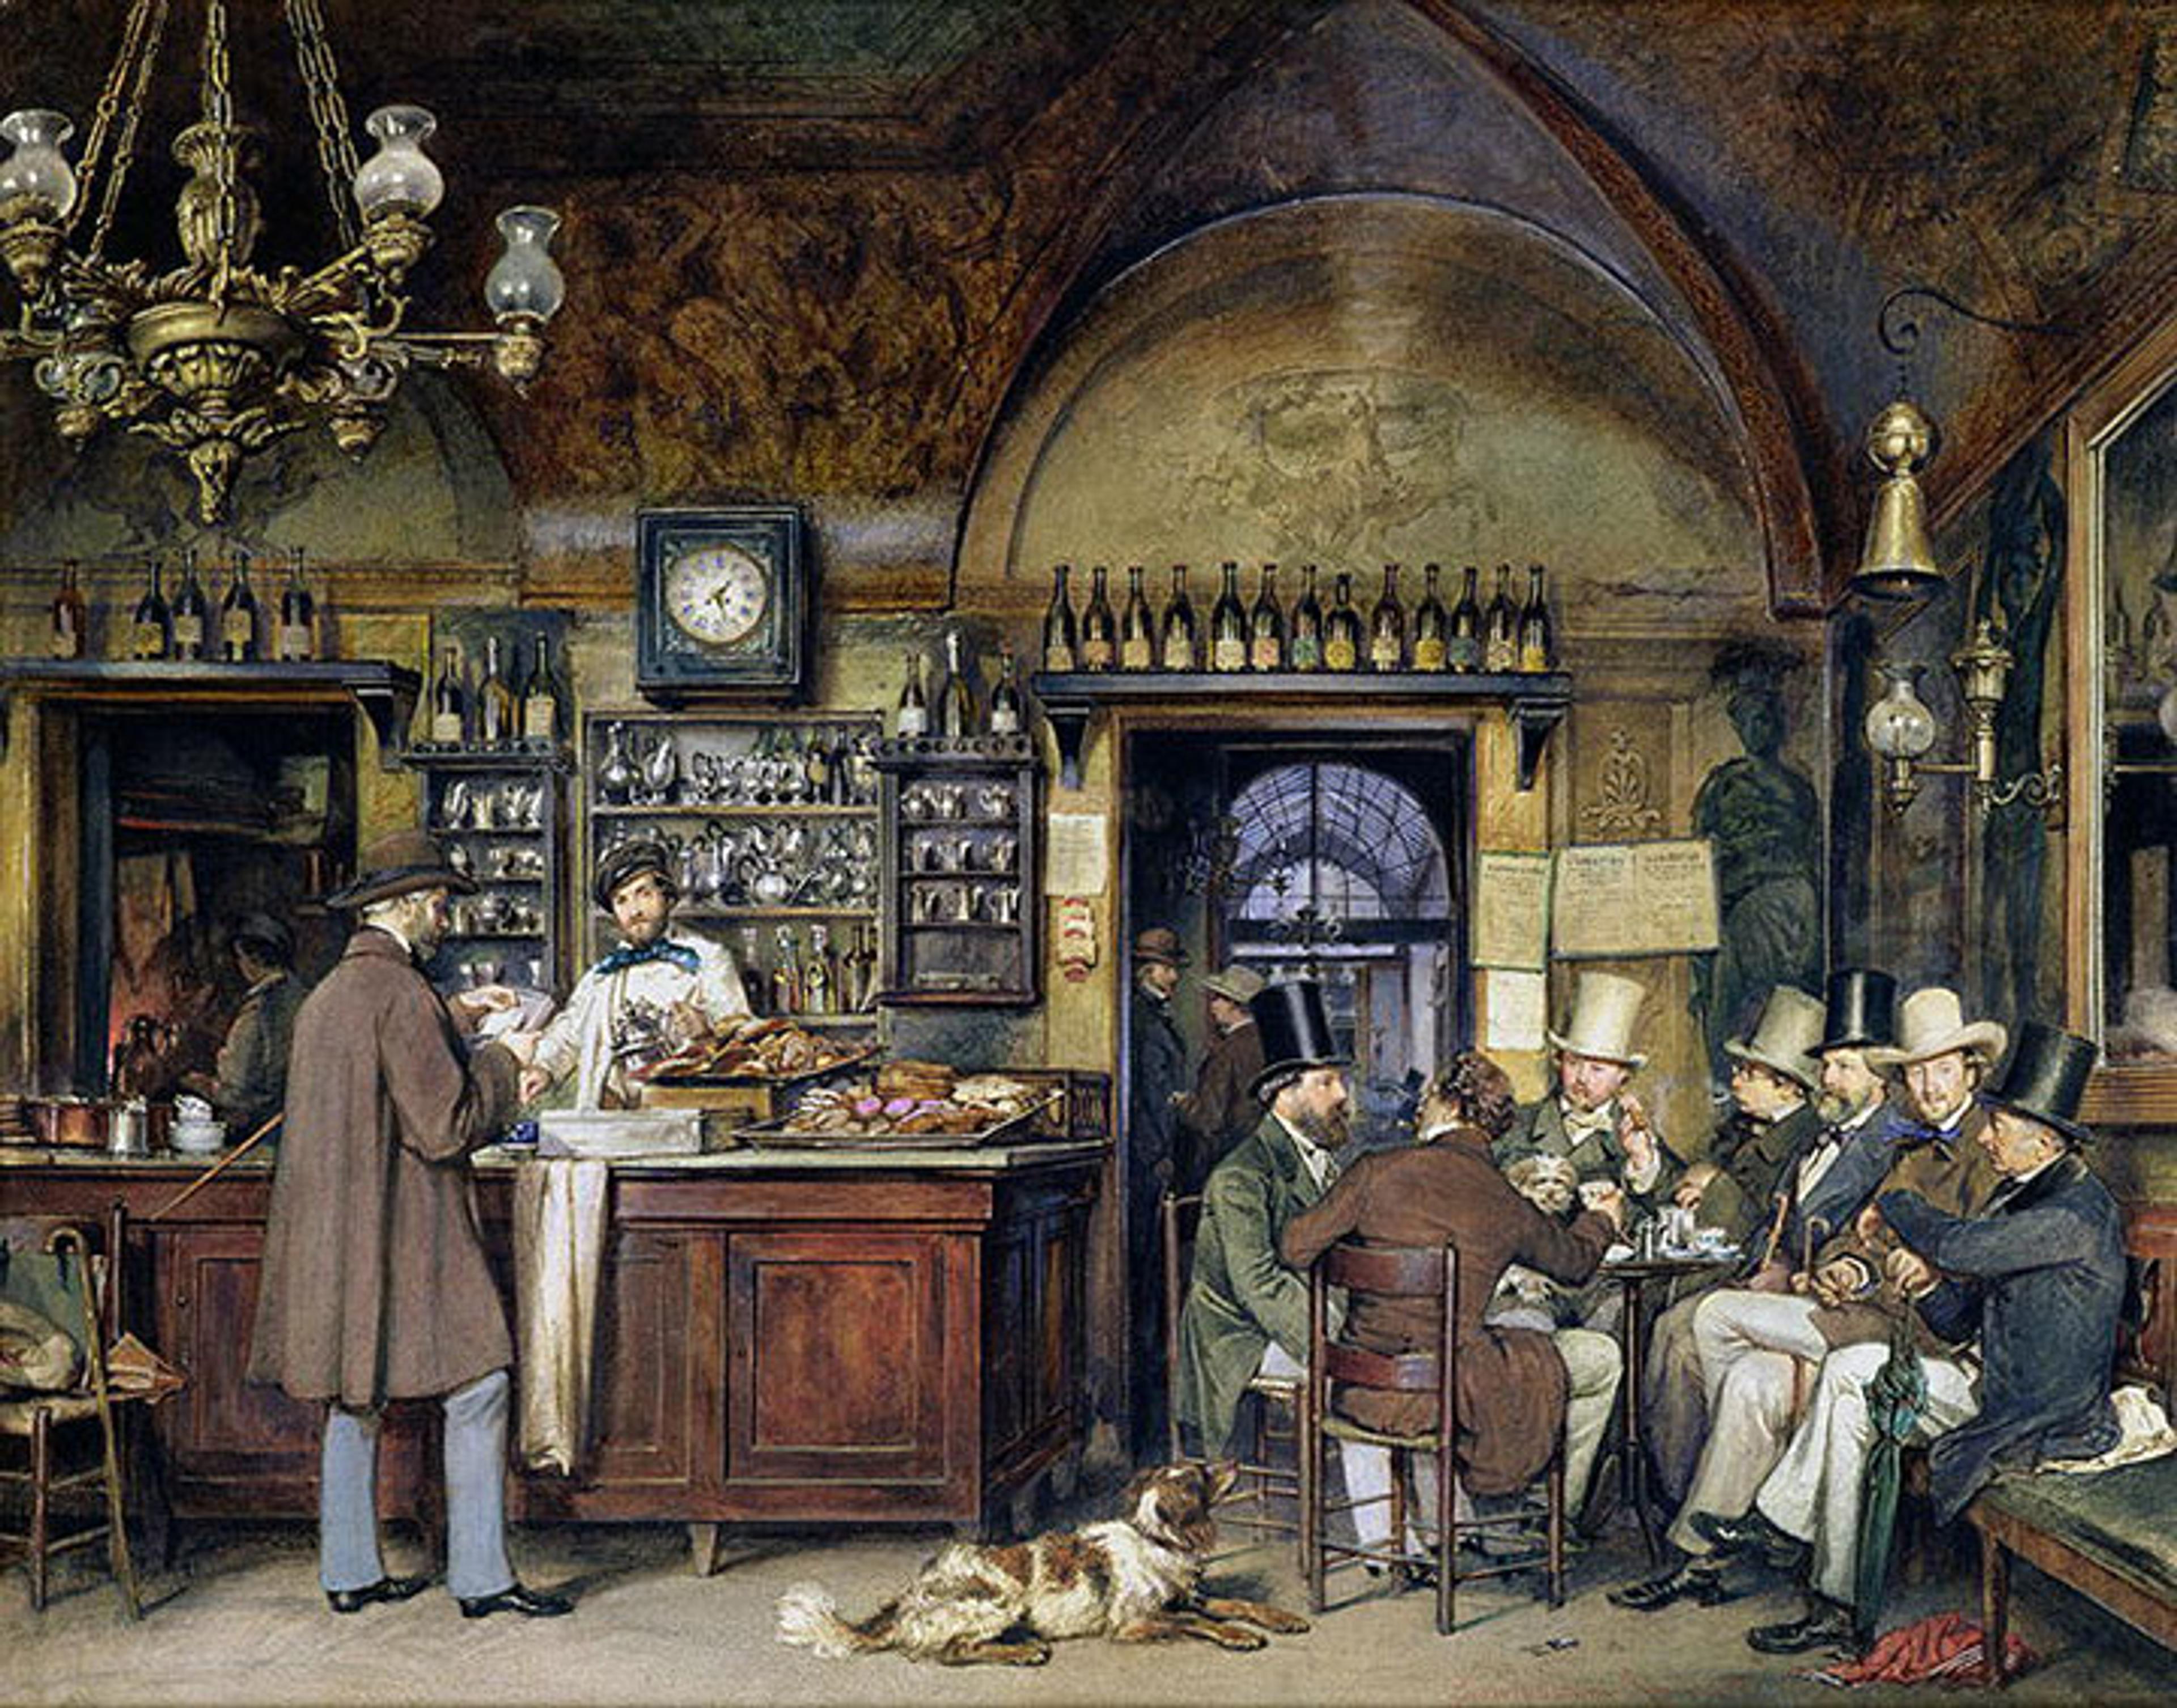 A color depiction of the Caffe Greco interior by Ludwig Passini